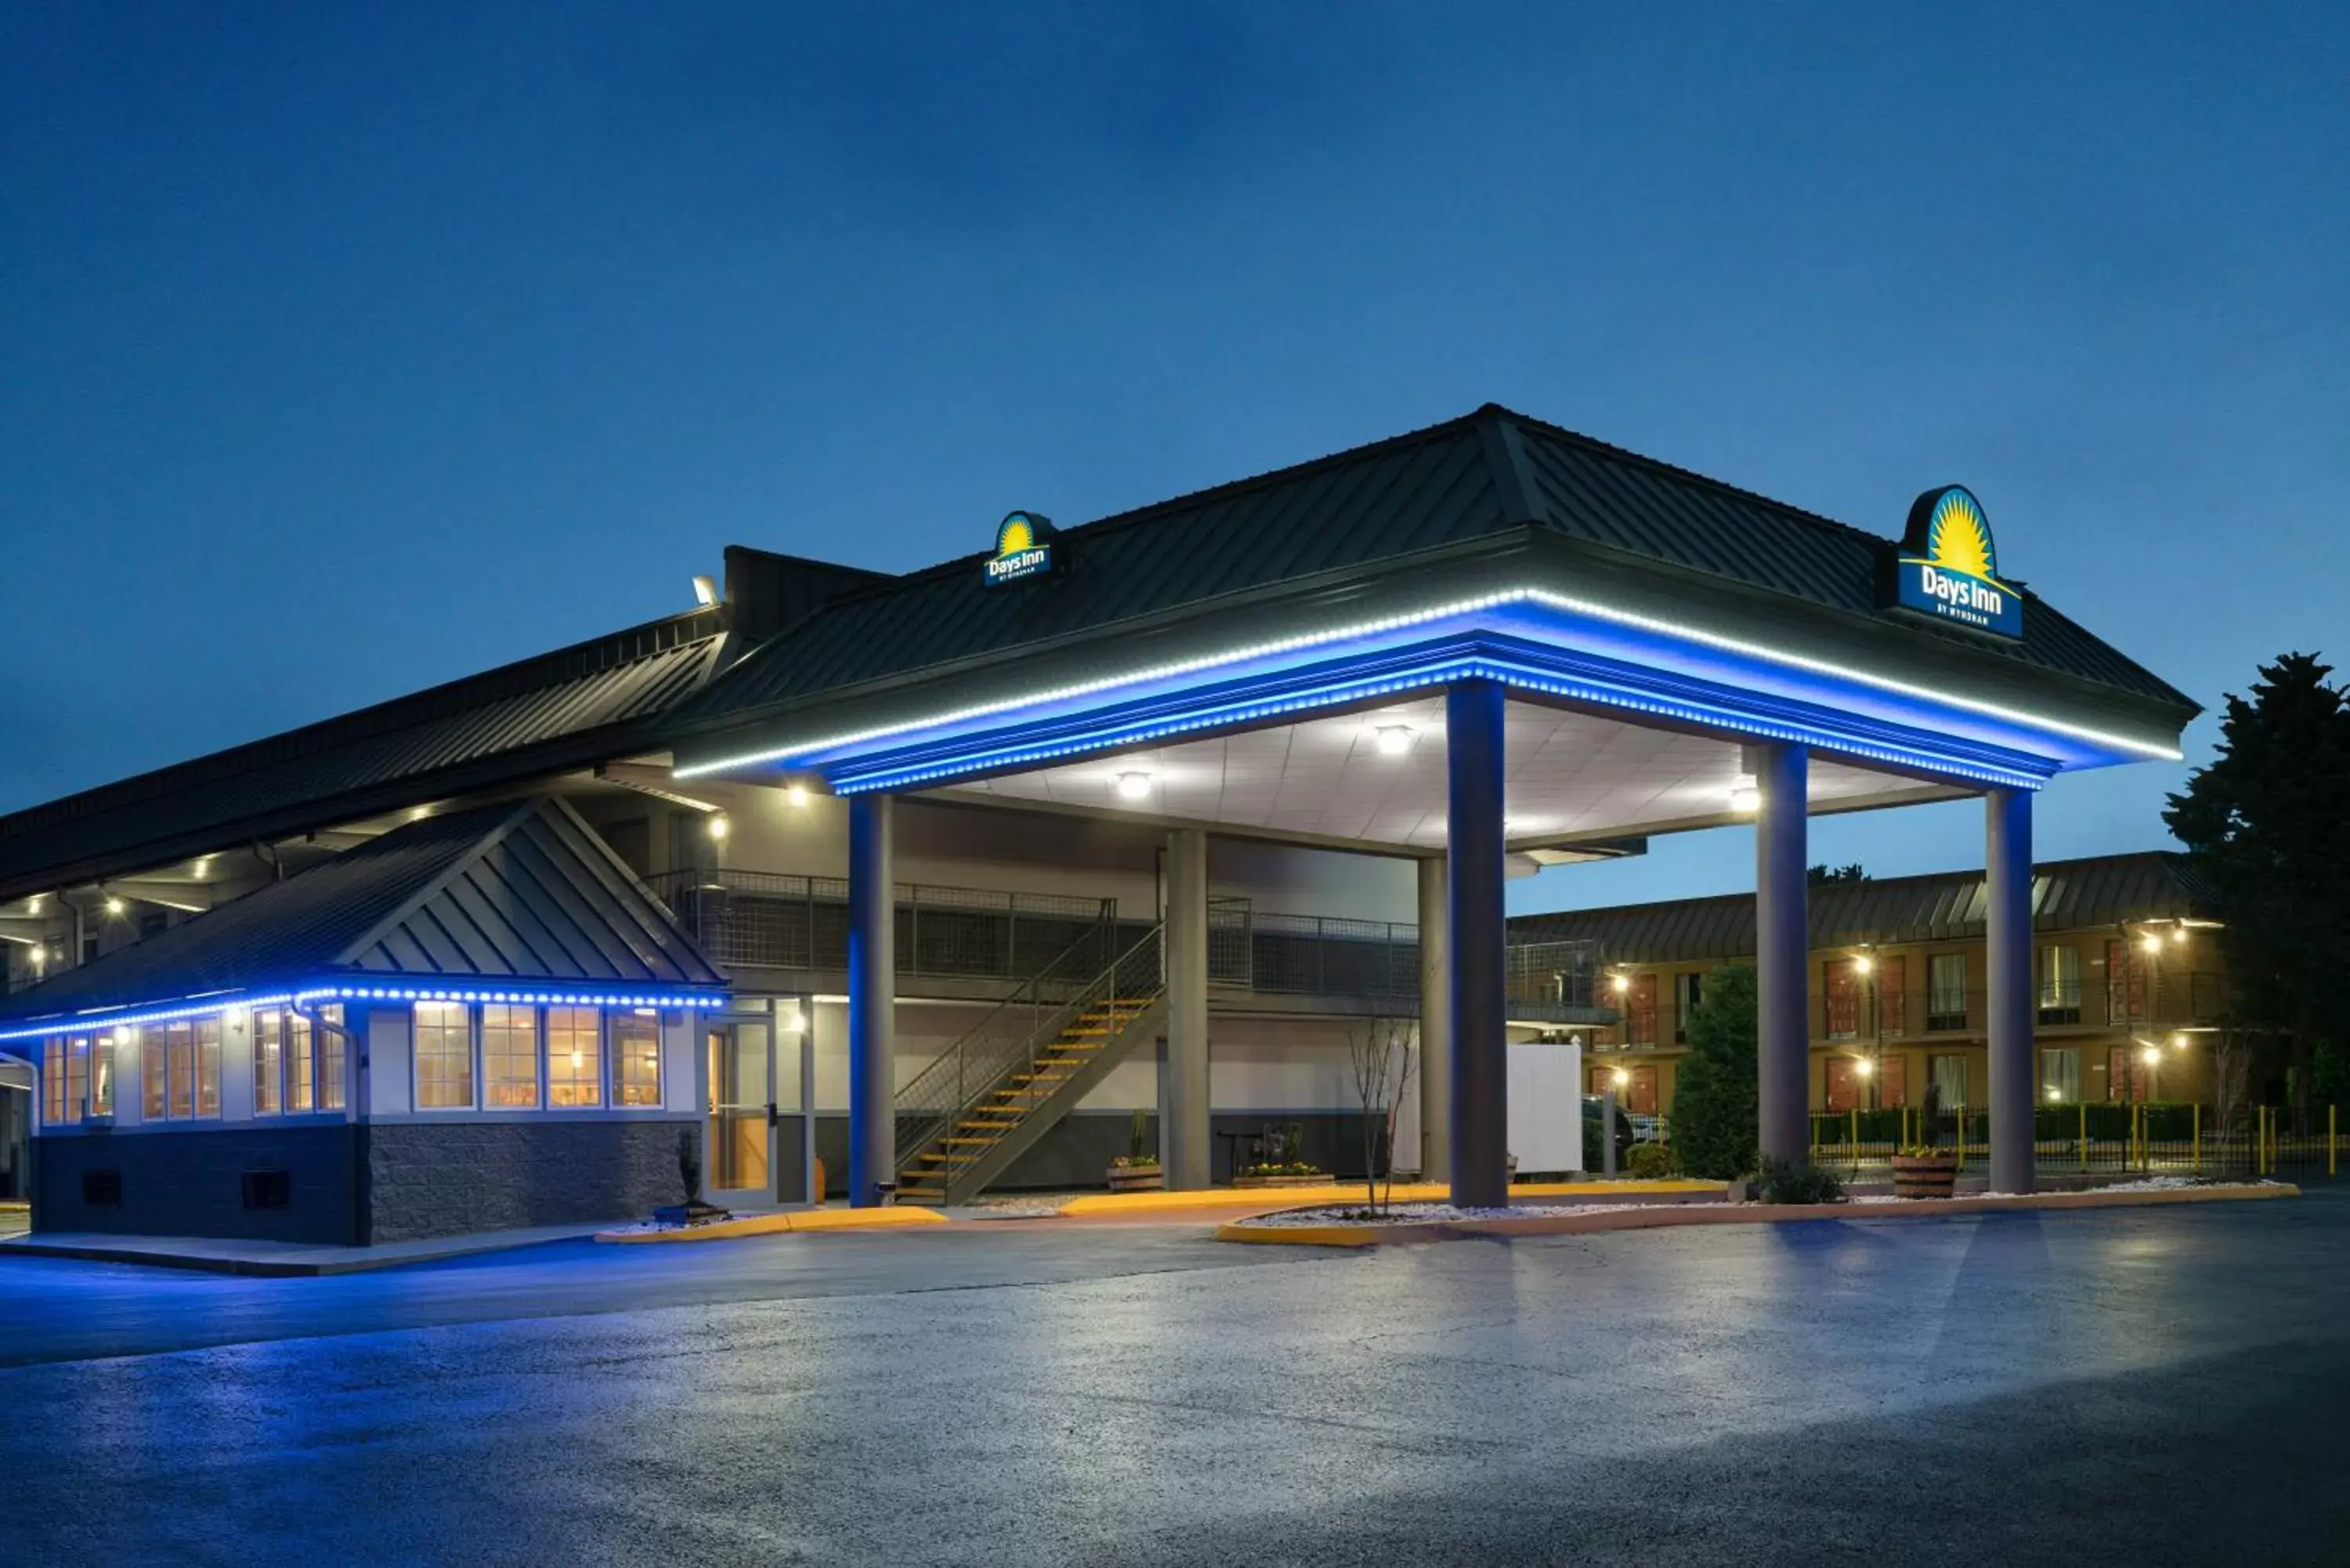 Property building, Swimming Pool in Days Inn by Wyndham Knoxville North